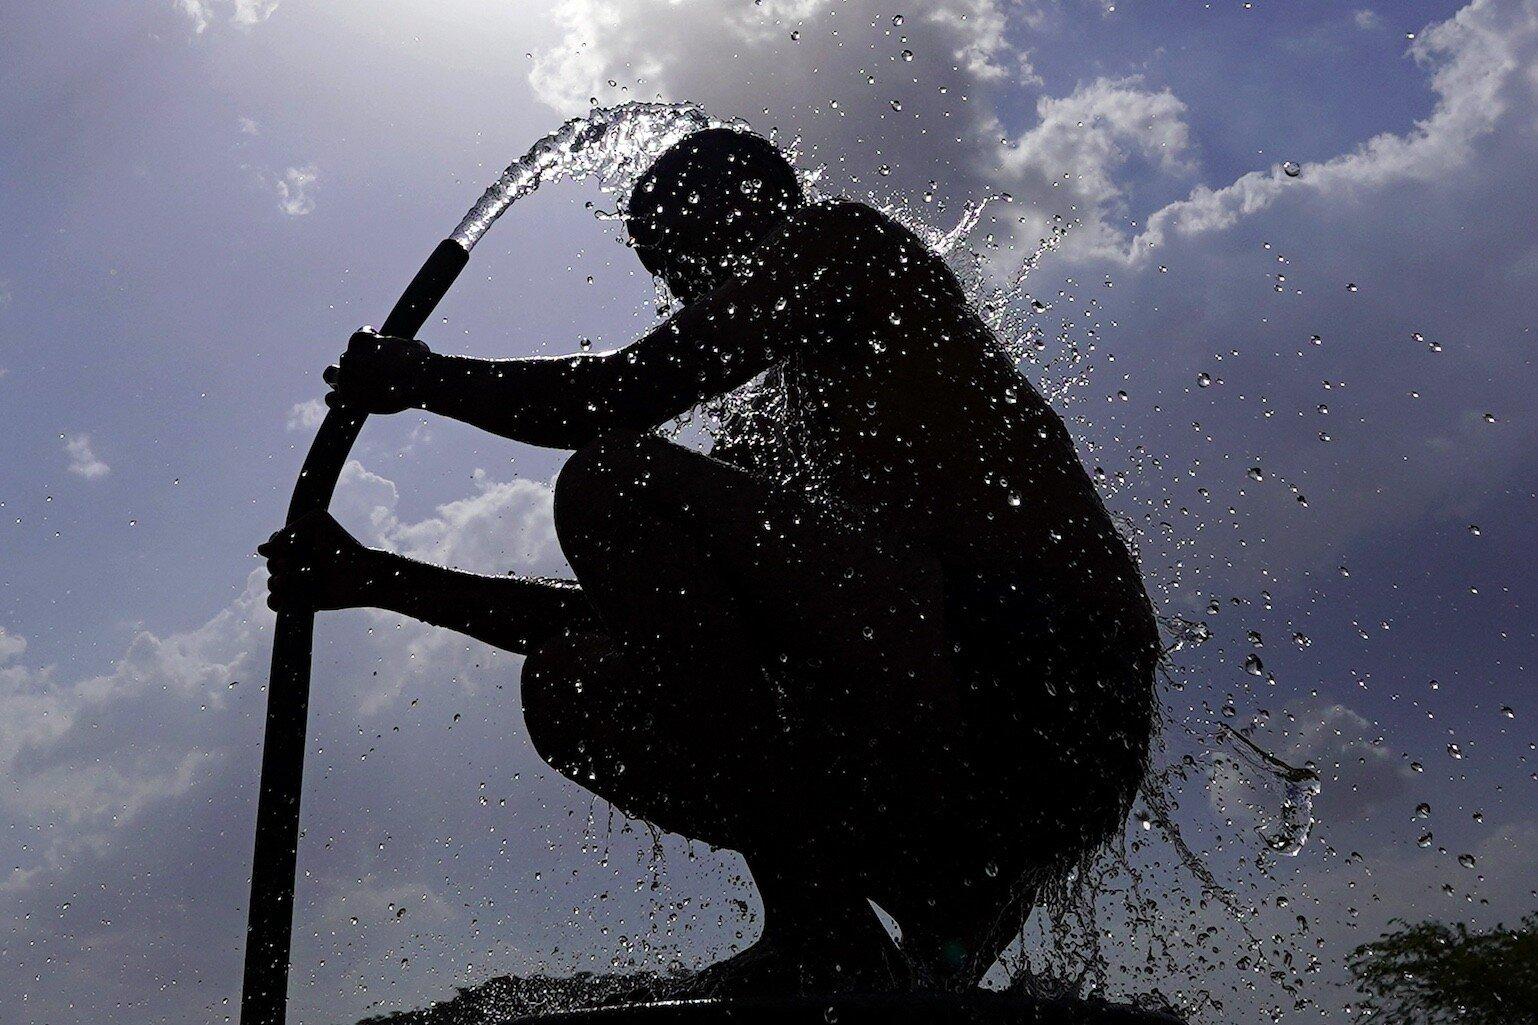 A man is silhouetted against the sun as he bathes using a water hose on a hot day.